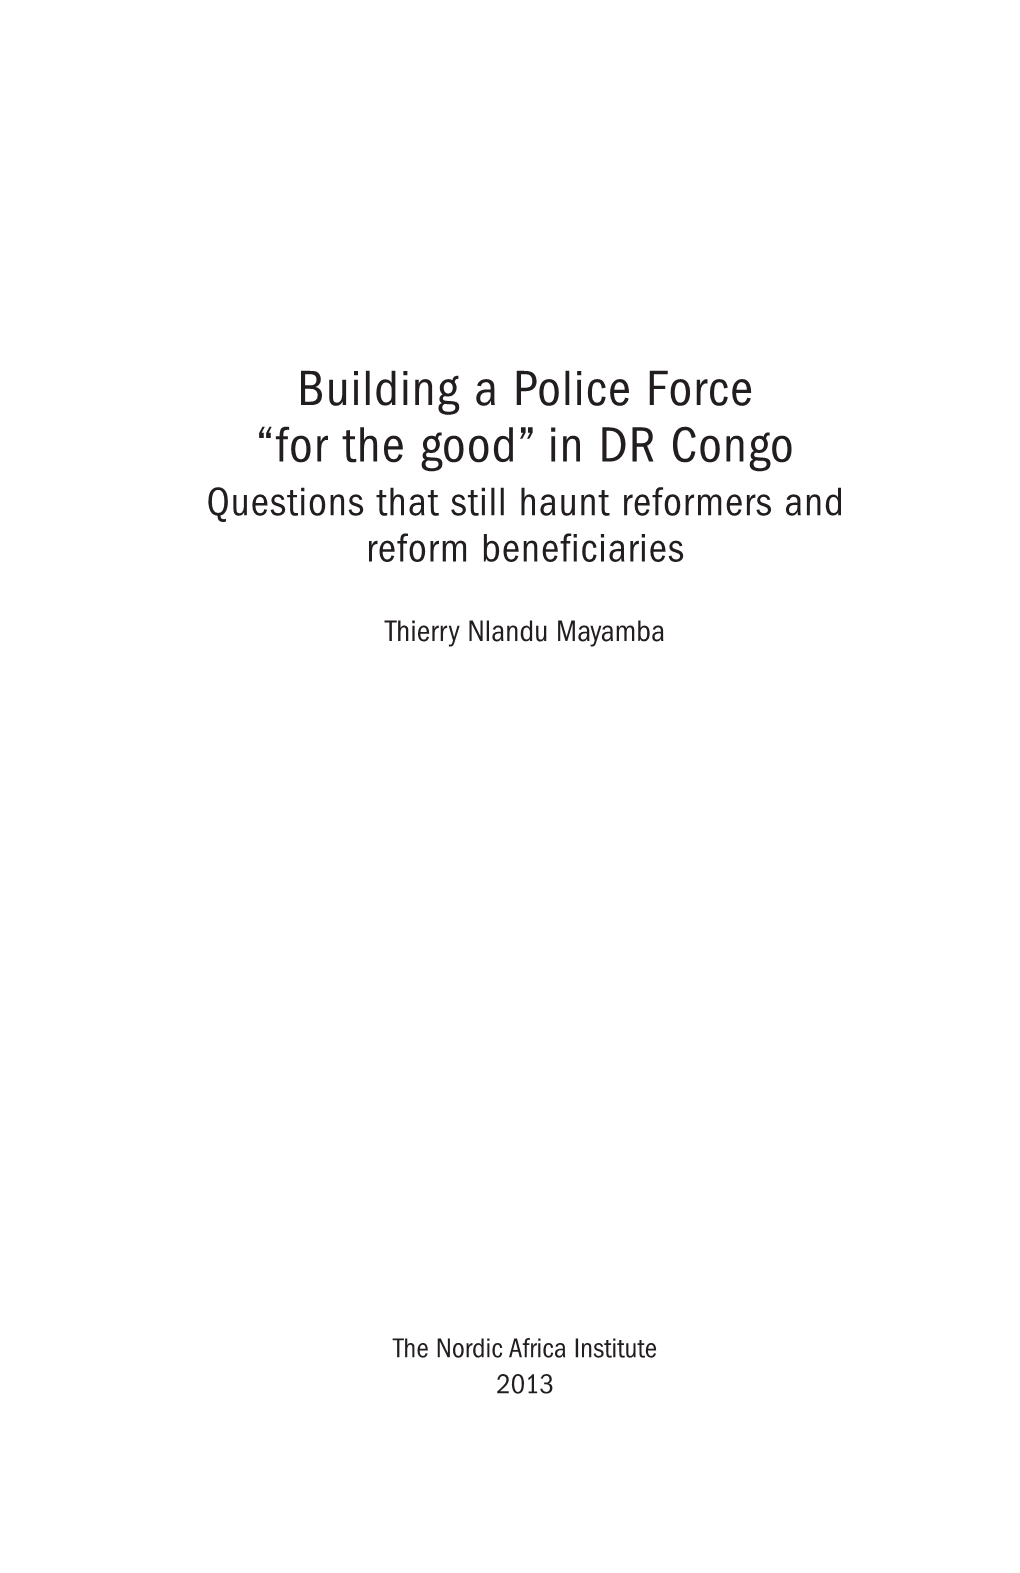 In DR Congo Questions That Still Haunt Reformers and Reform Beneficiaries